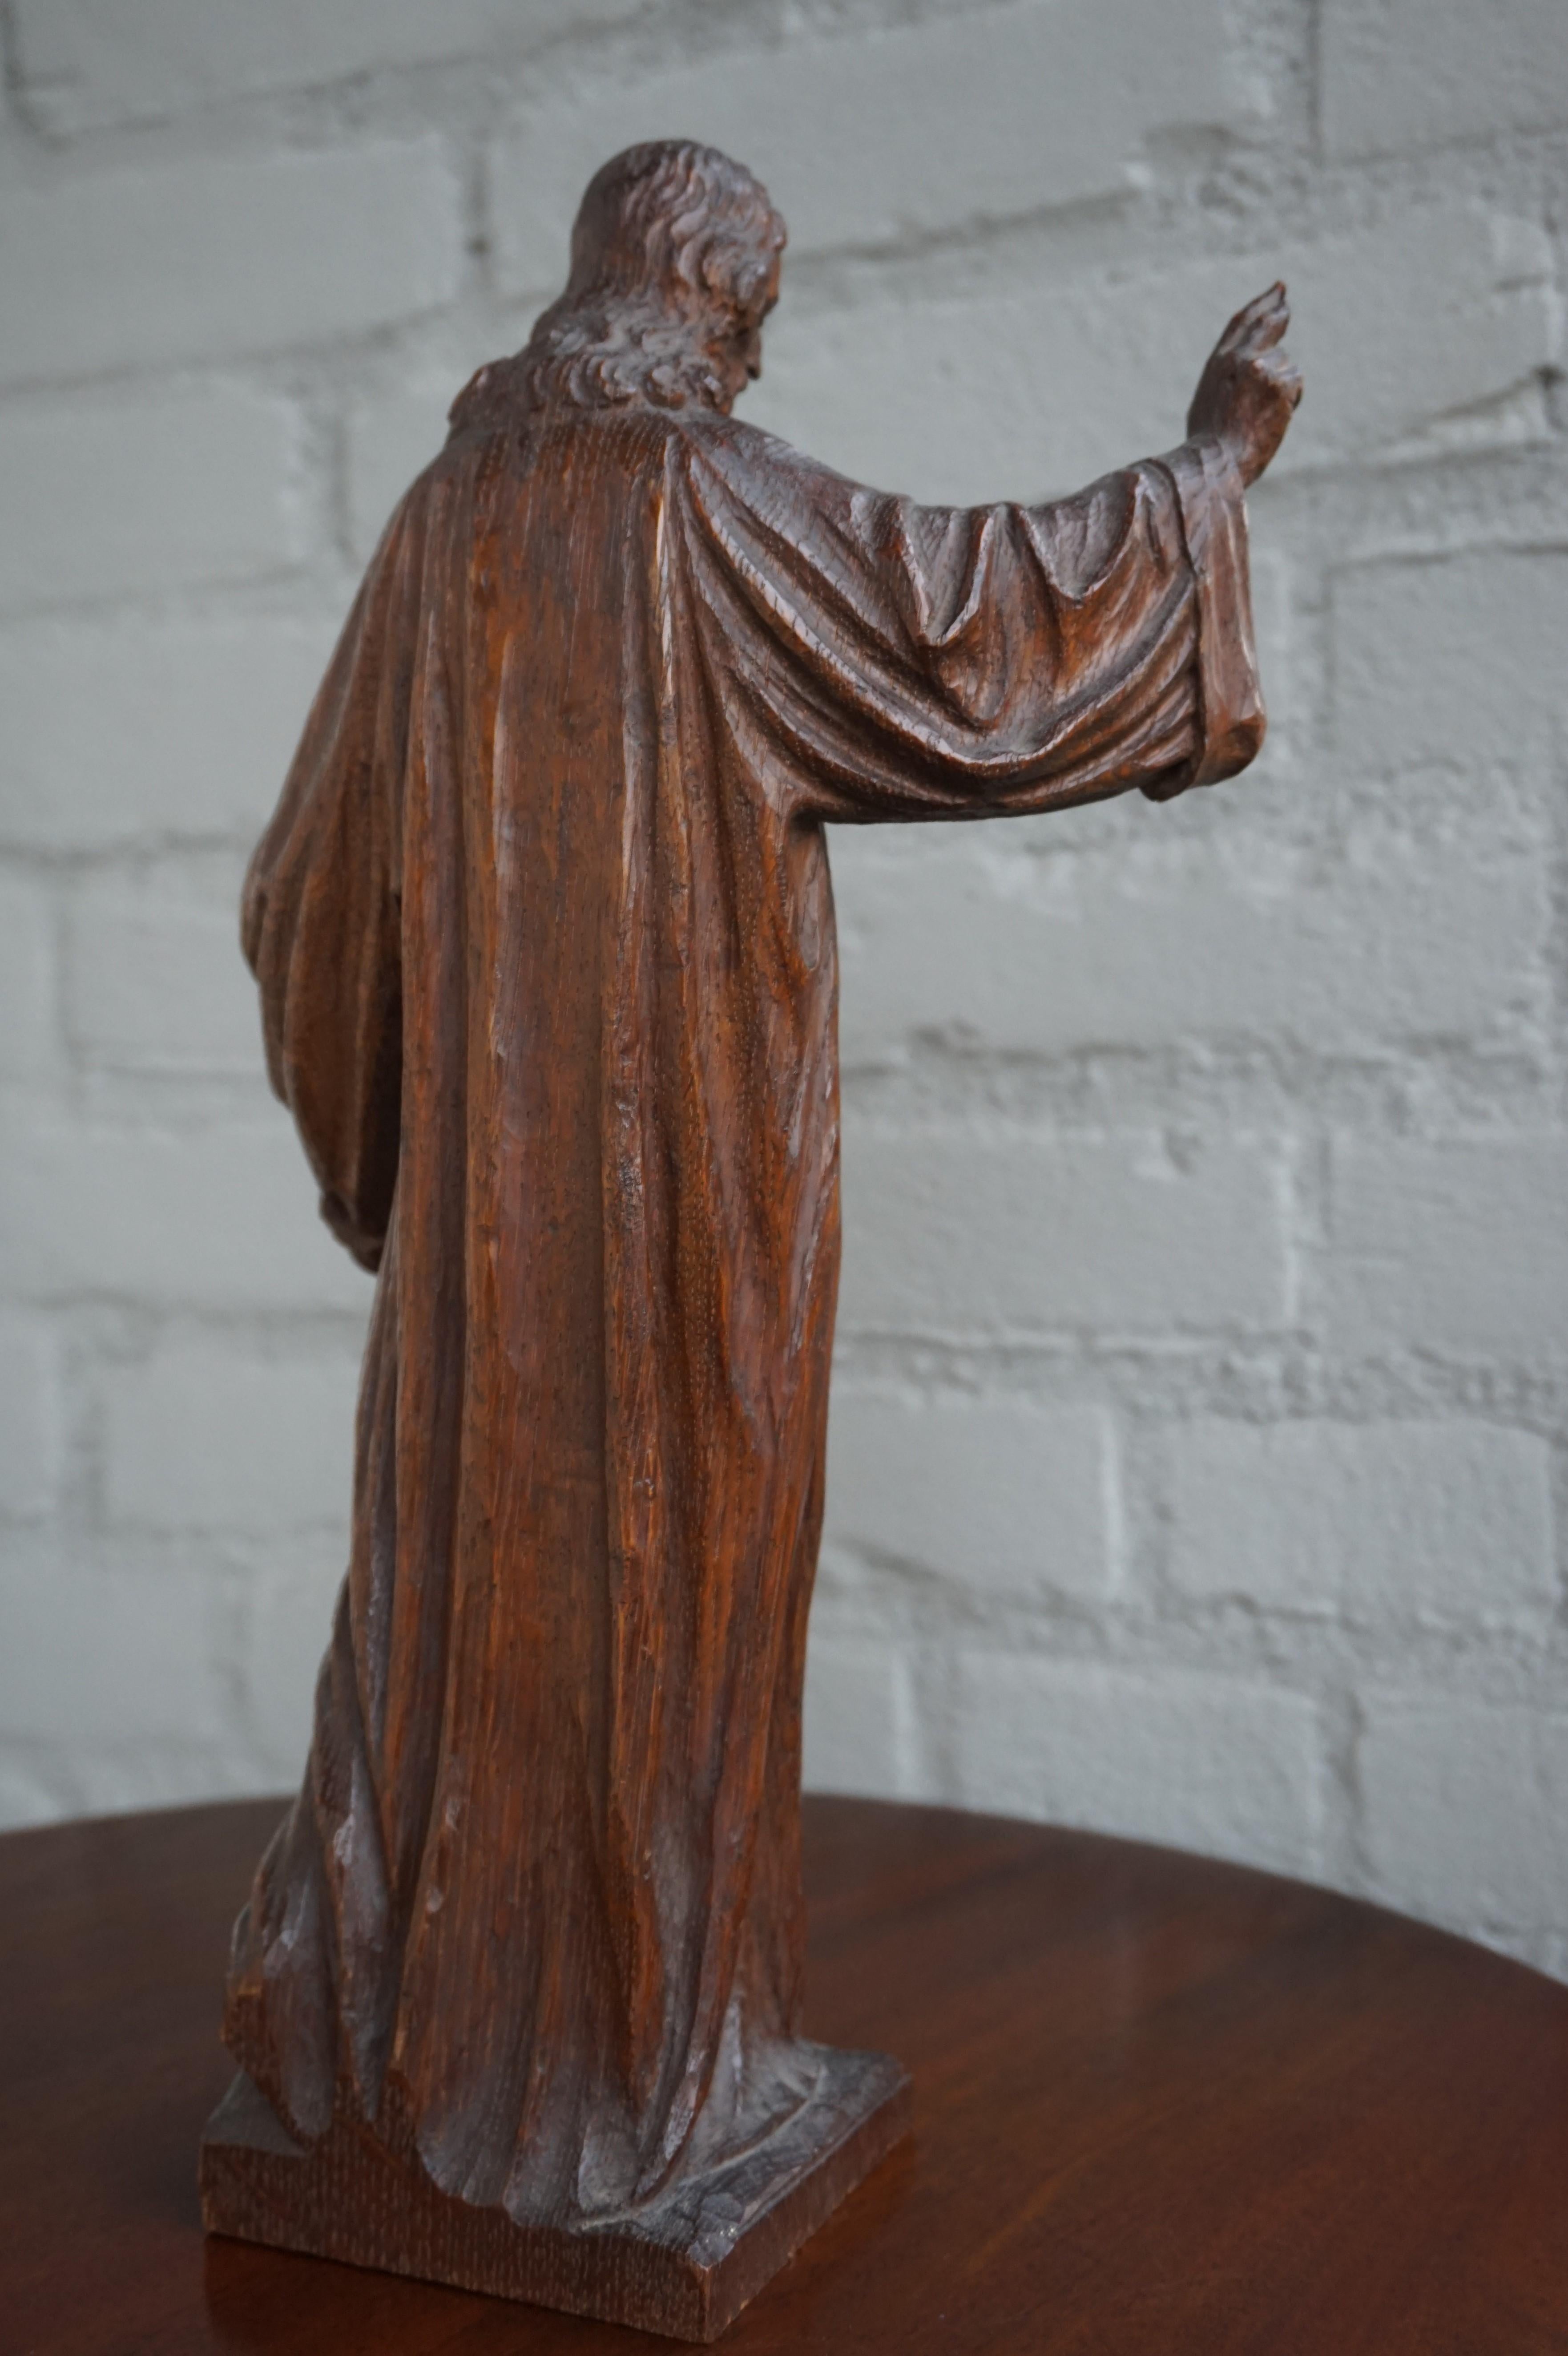 Antique and Hand Carved Sculpture of Our Lord & Teacher Jesus by Bruno Gerrits 2